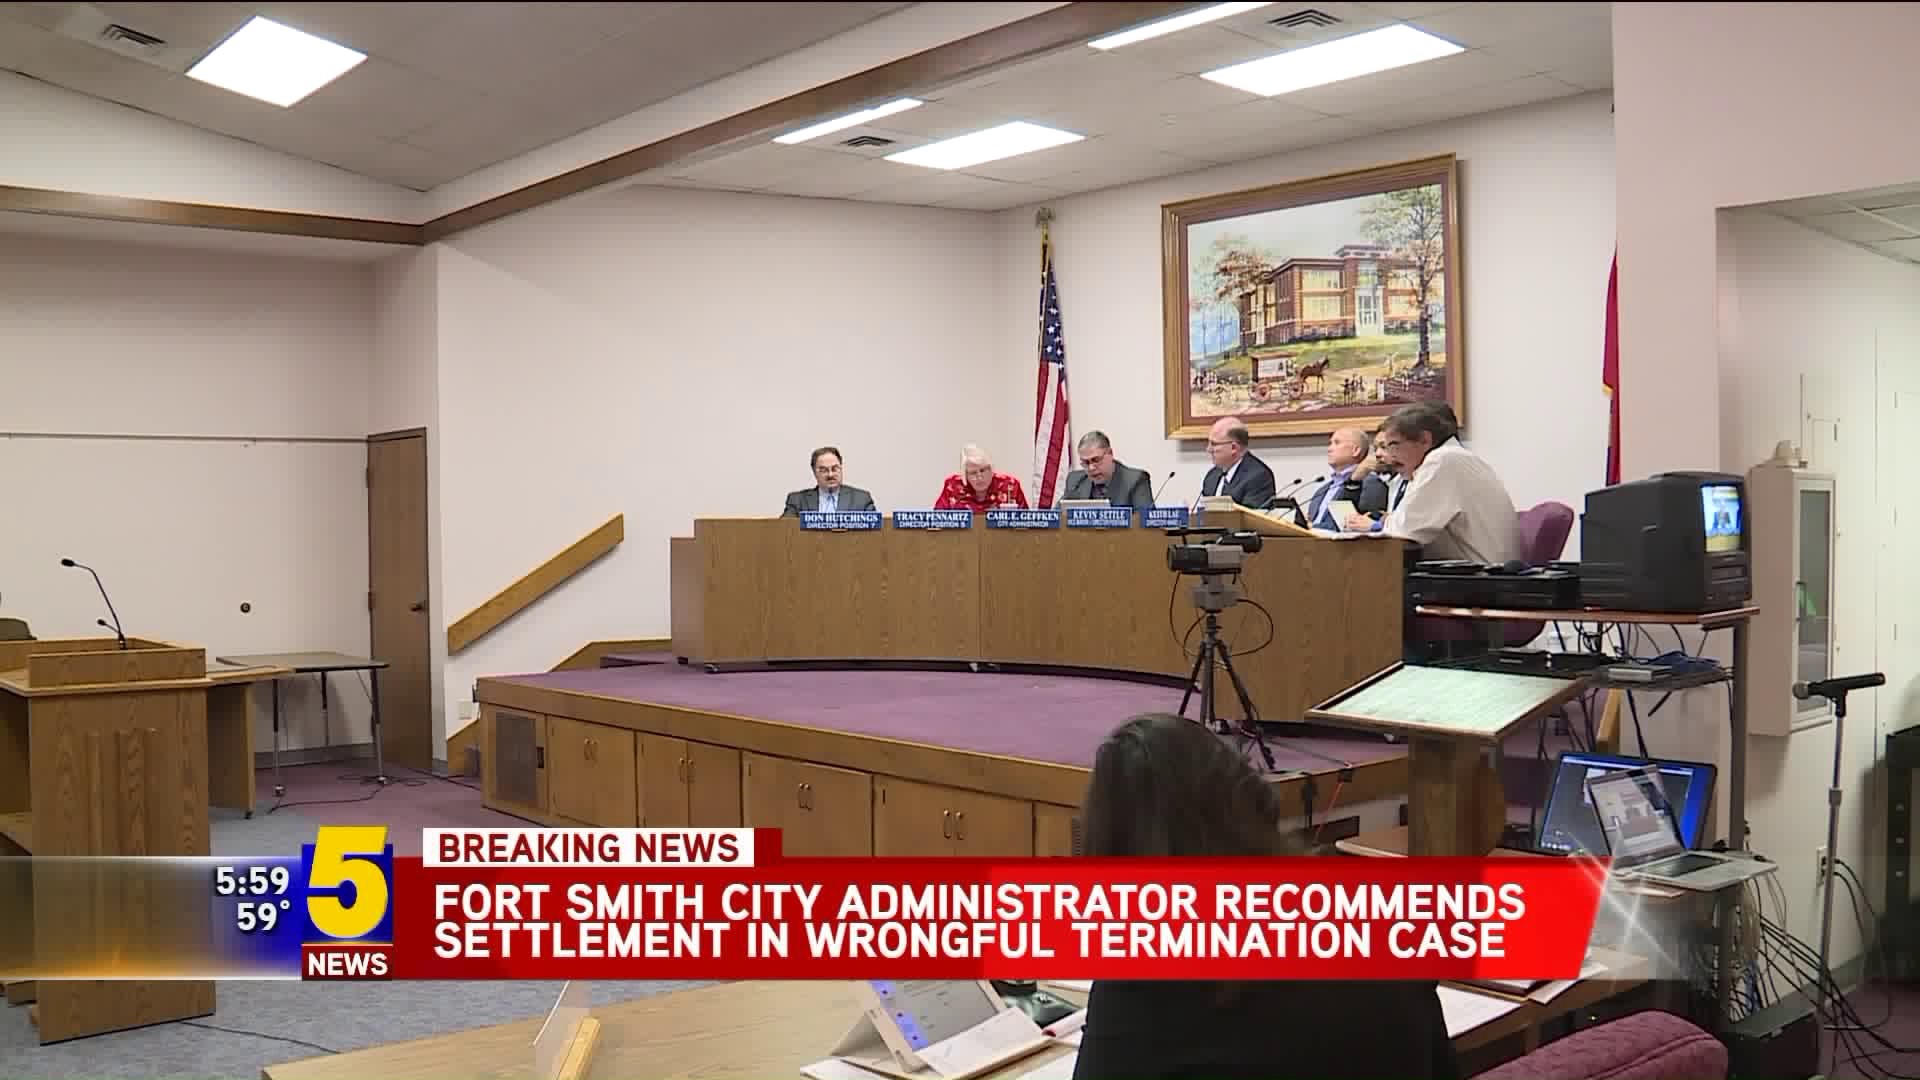 Fort Smith City Administration Recommends Settlement In Wrongful Termination Case